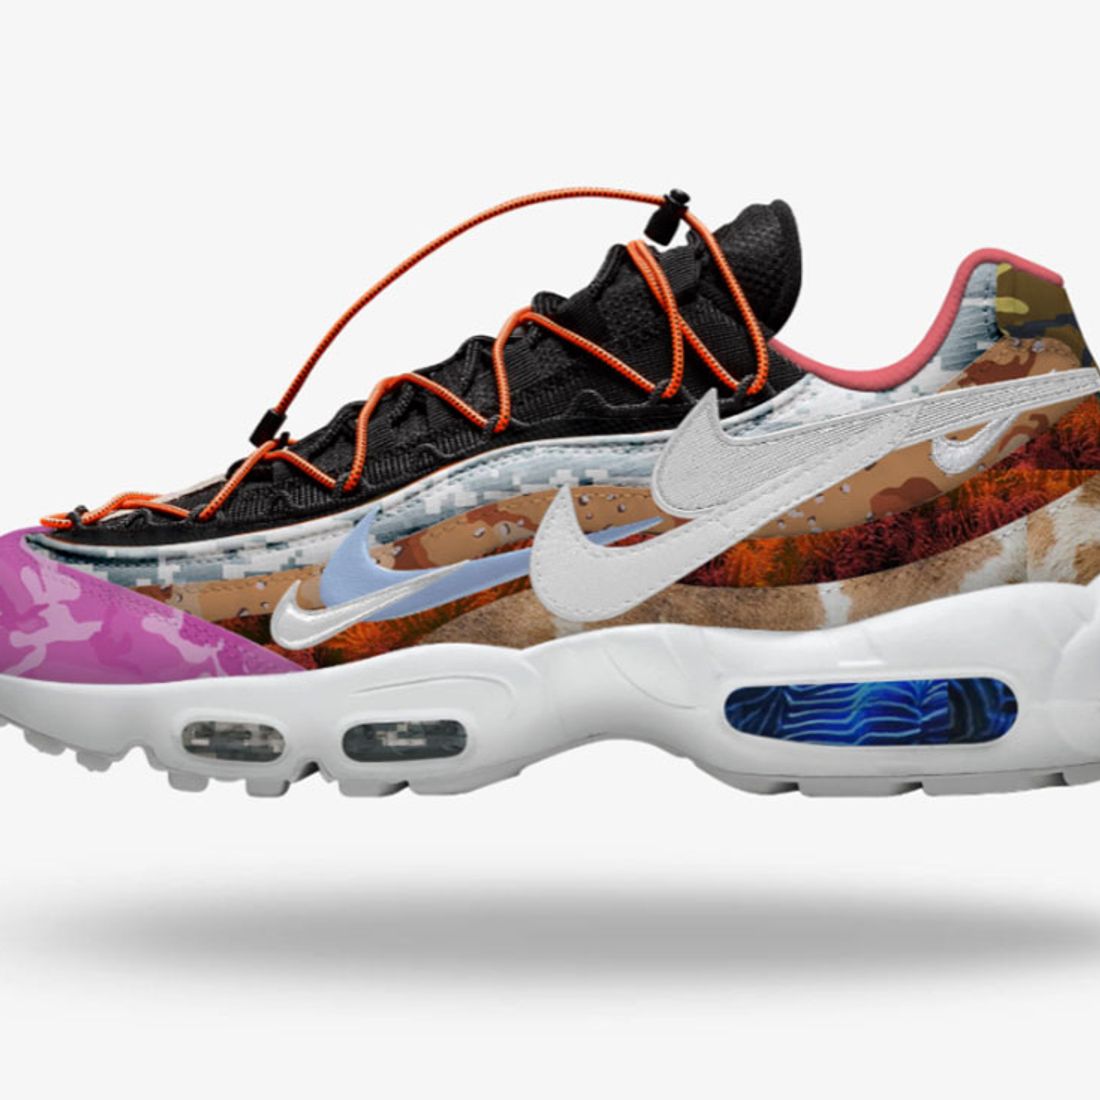 retorta cometer Bendecir Create Your Own Nike Air Max 95 at JD Sports to Win a Pair Designed by  ONEFOUR! - Sneaker Freaker